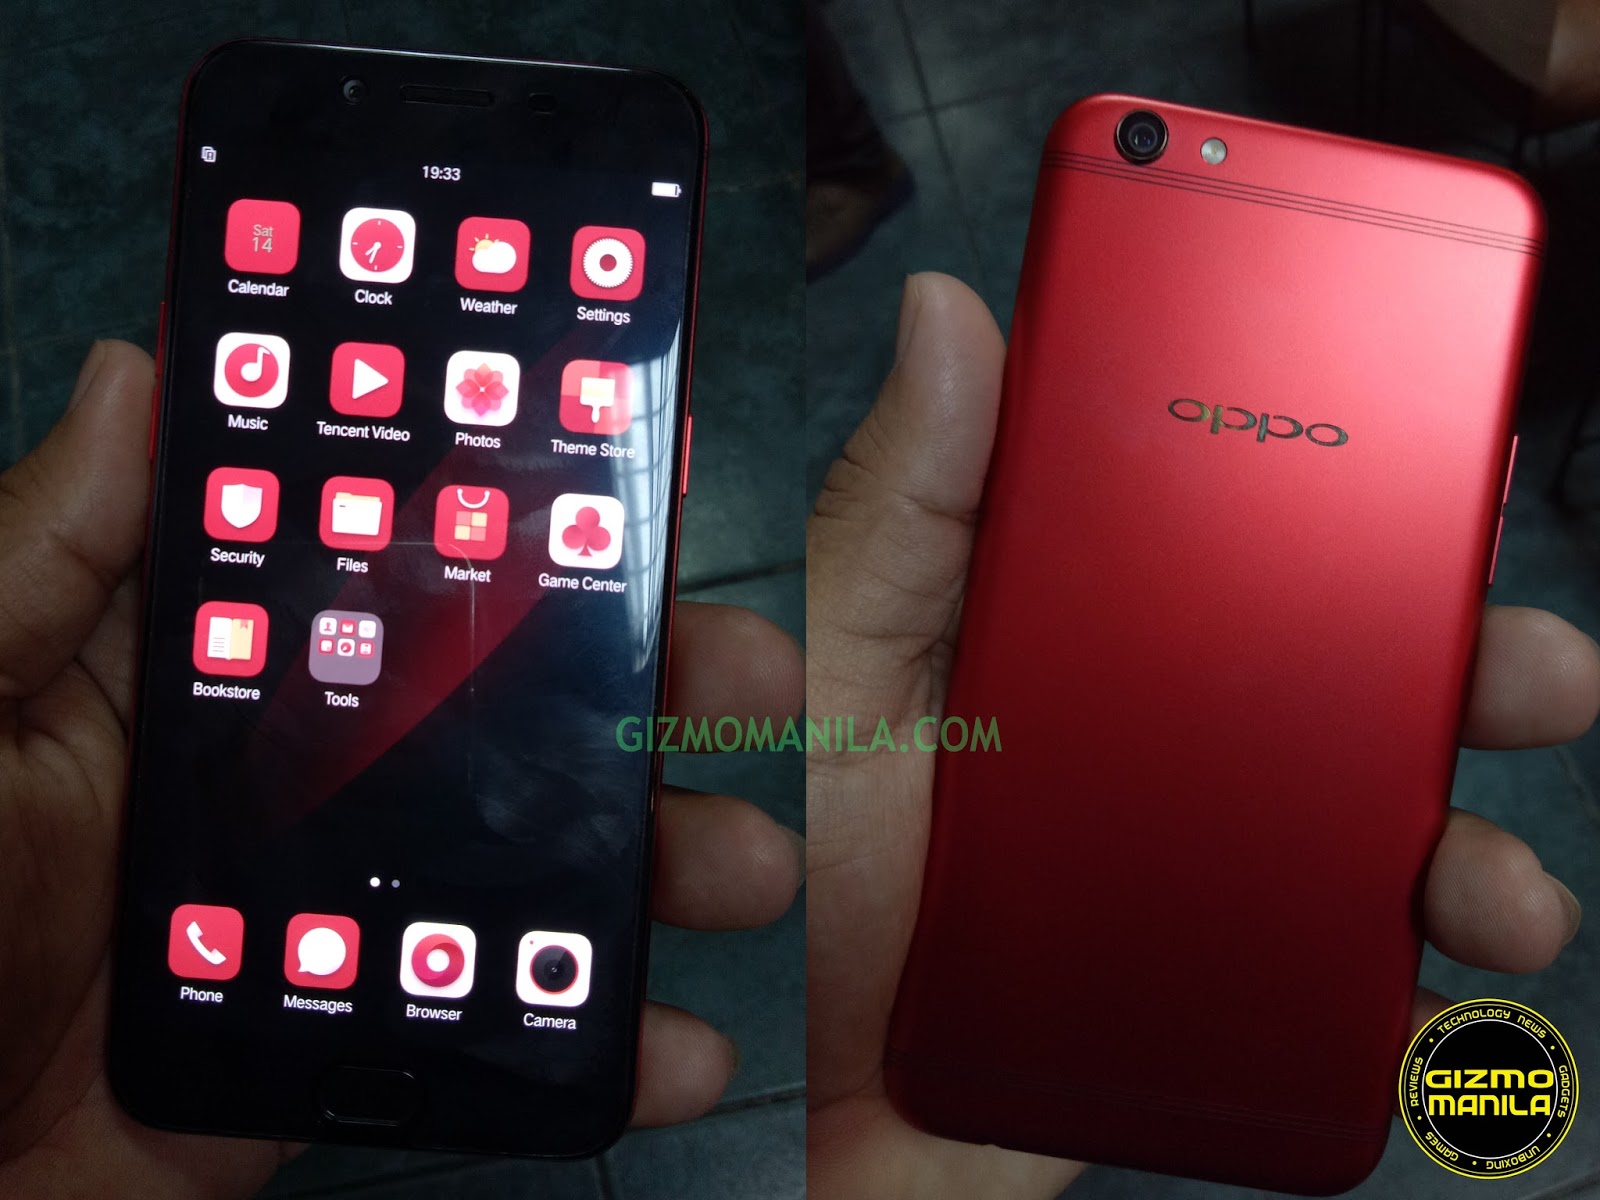 Theme Oppo F3 Red - 1600x1200 Wallpaper 